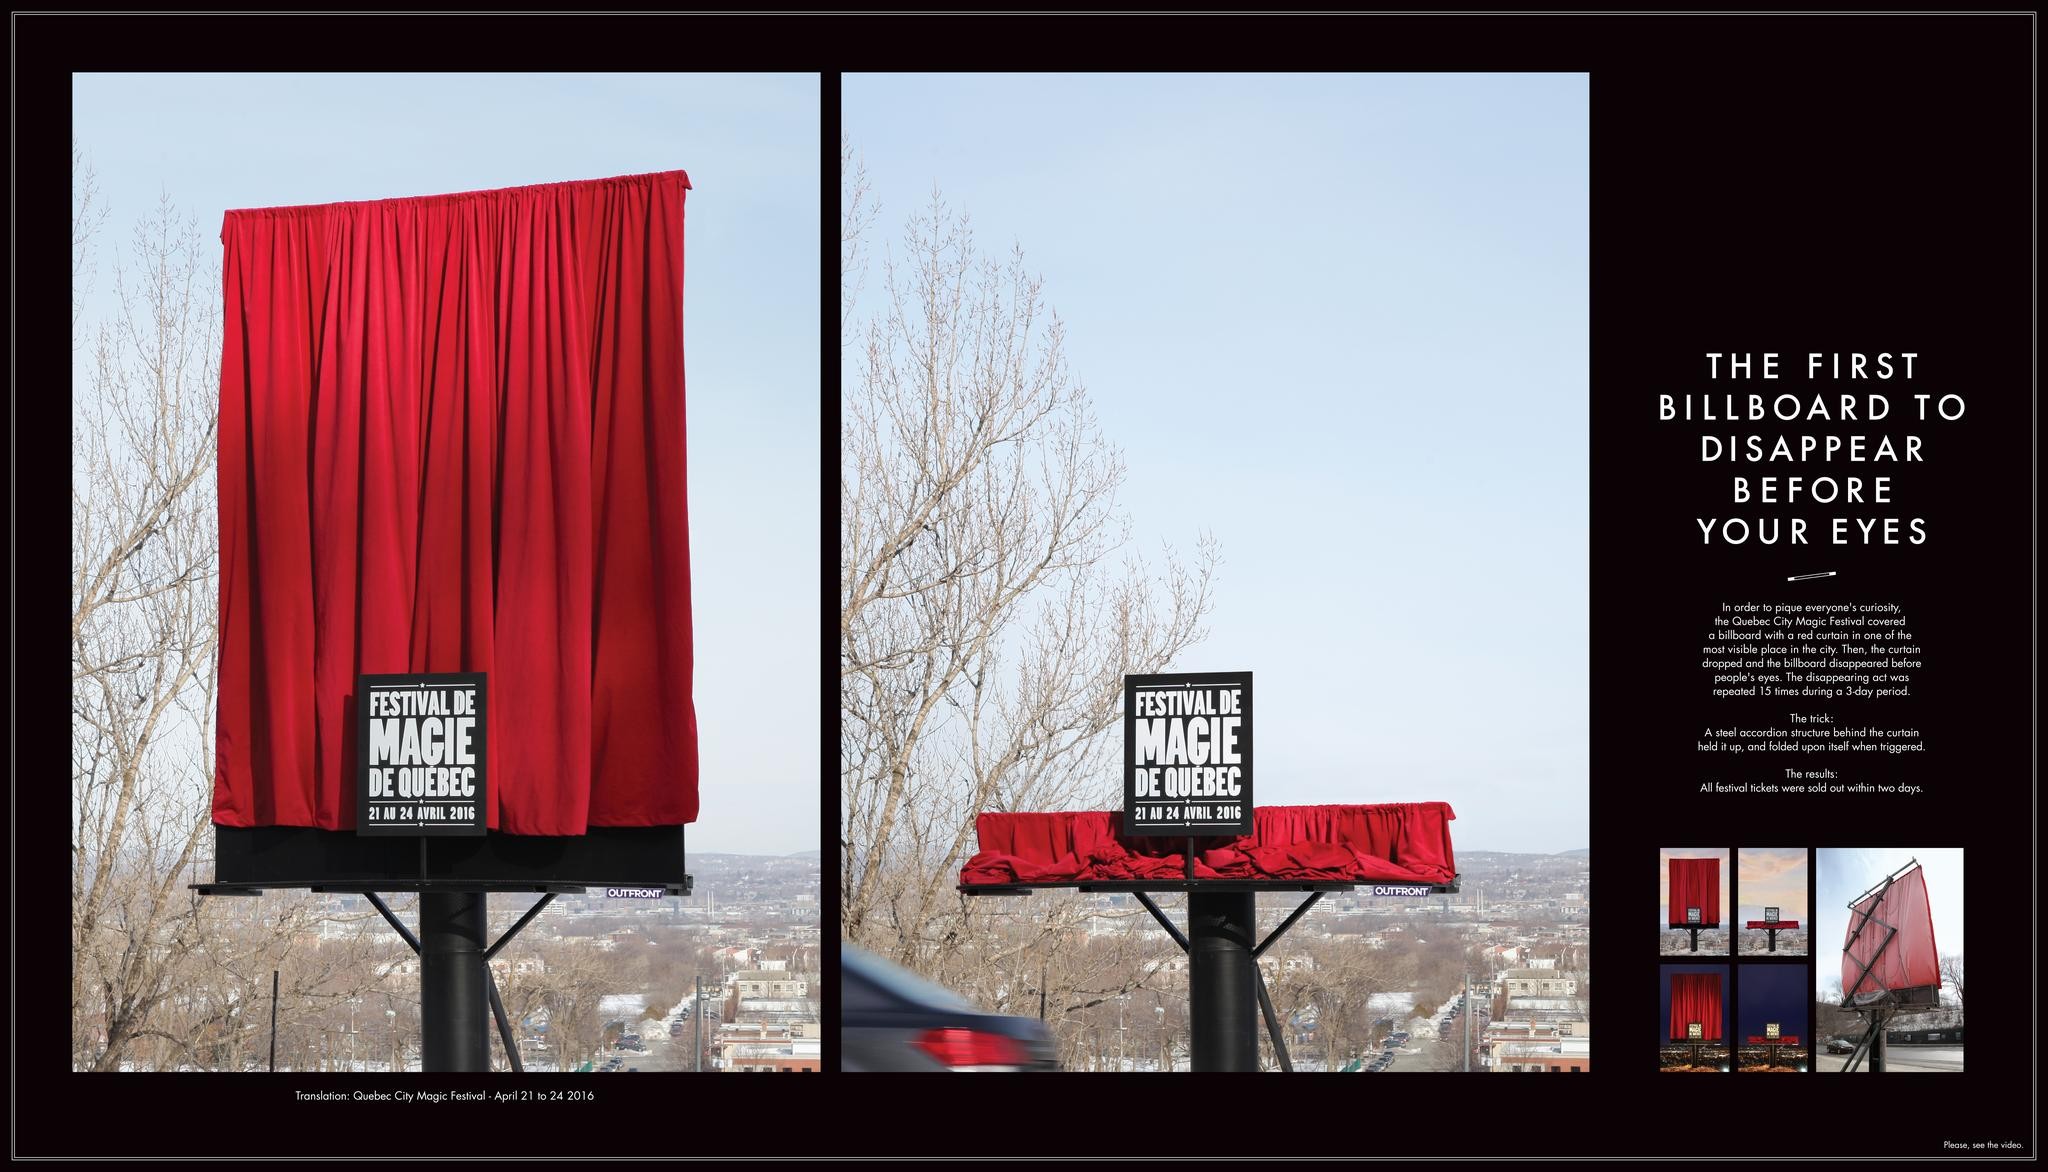 The Mysterious Billboard